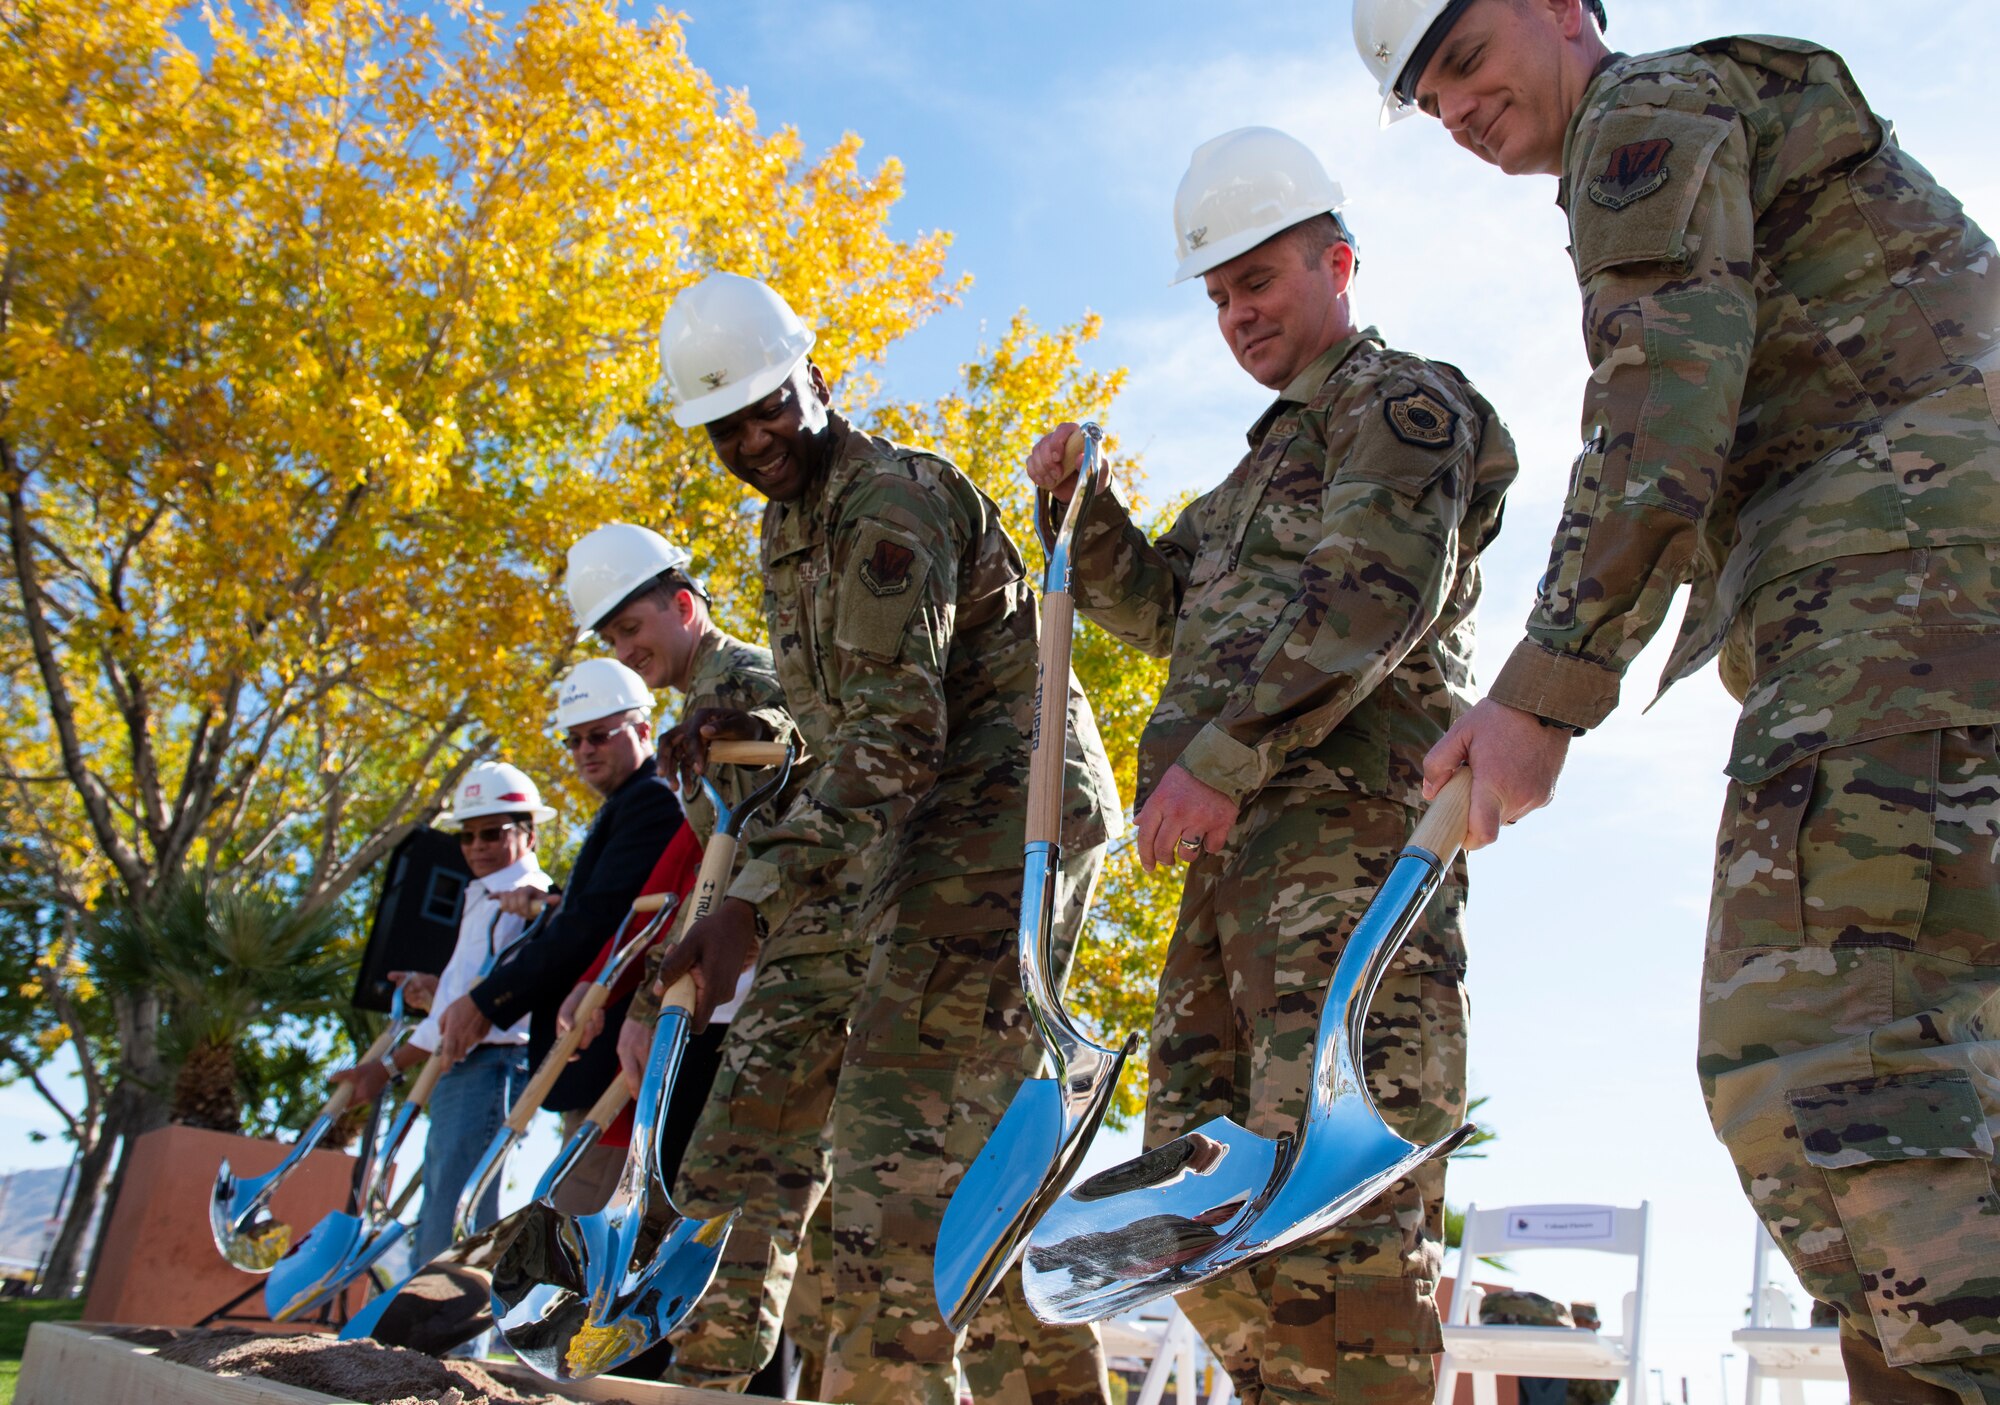 Nellis Air Force Base and City of Las Vegas leadership break ground on a new trauma center during a ceremony celebrating the Mike O’Callaghan Military Medical Center’s 25th Anniversary on Nellis Air Force Base, Nevada, Nov. 12, 2019. The ground breaking marks the beginning of a three year endeavor for the MOMMC to become a level three trauma center. (U.S. Air Force photo by Senior Airman Kevin Tanenbaum)